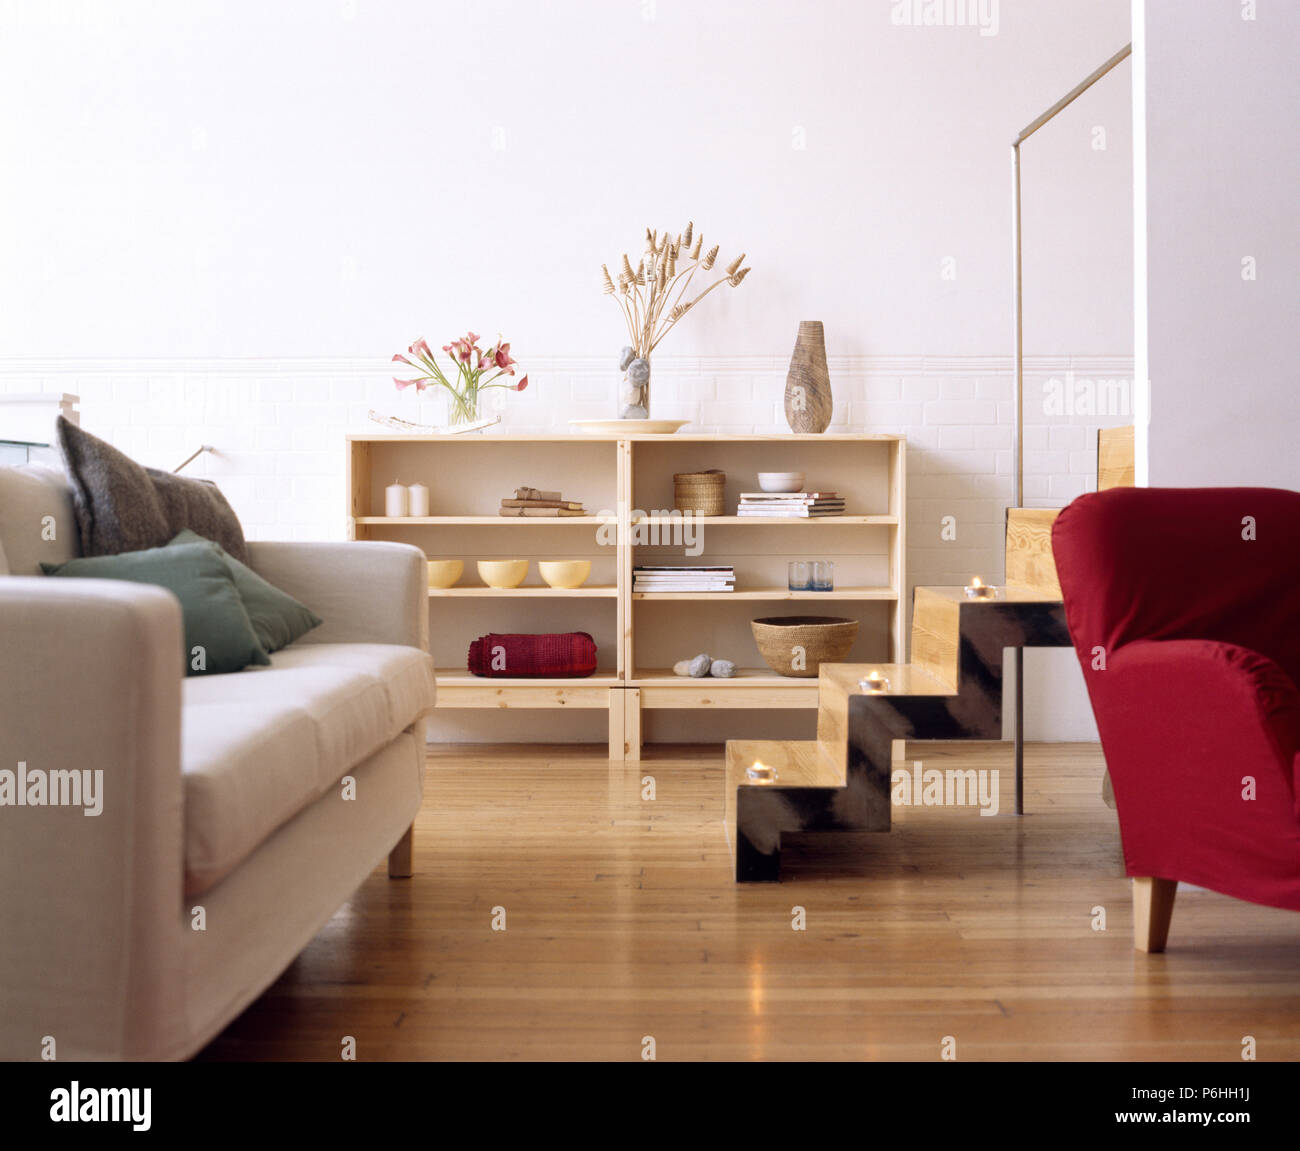 White sofa and red chair in a modern urban living room with wooden floor and shelving and a wooden staircase Stock Photo